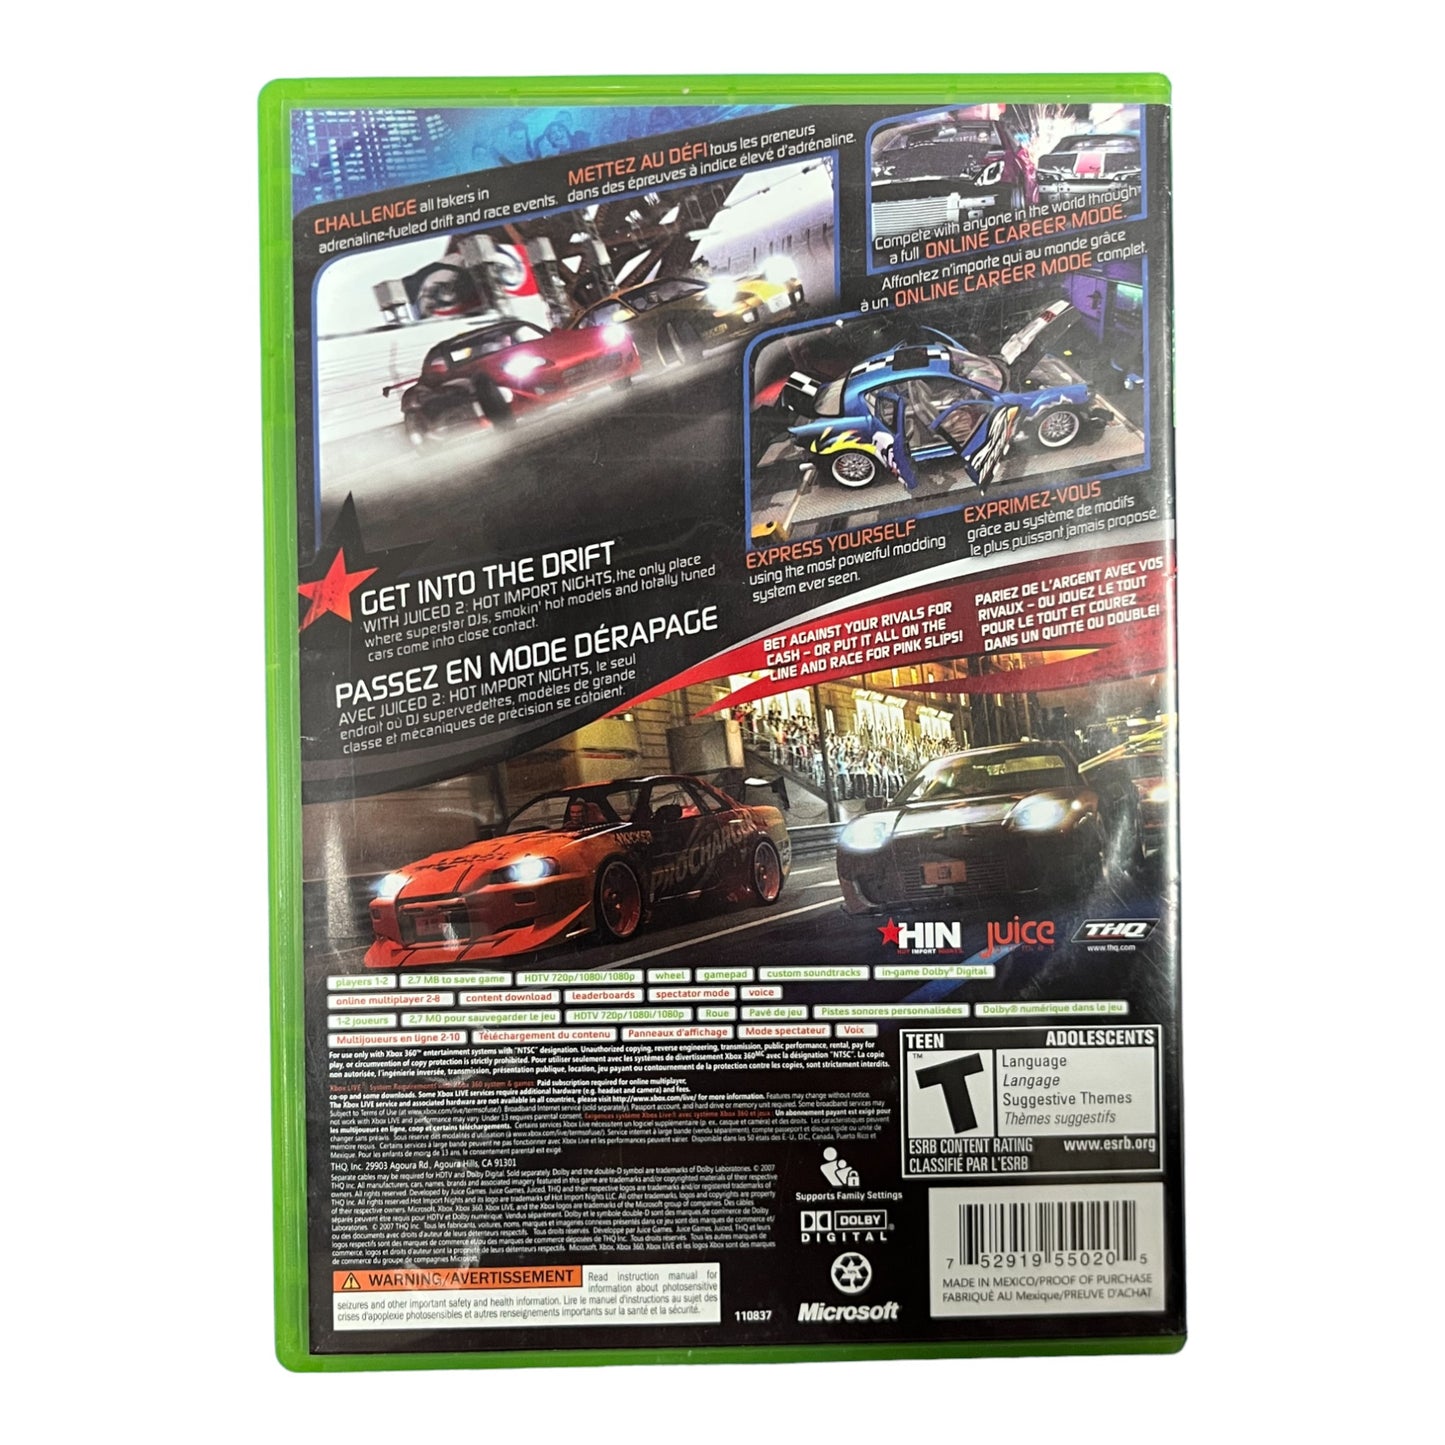 Juiced 2 Hot Import Nights (Xbox360)